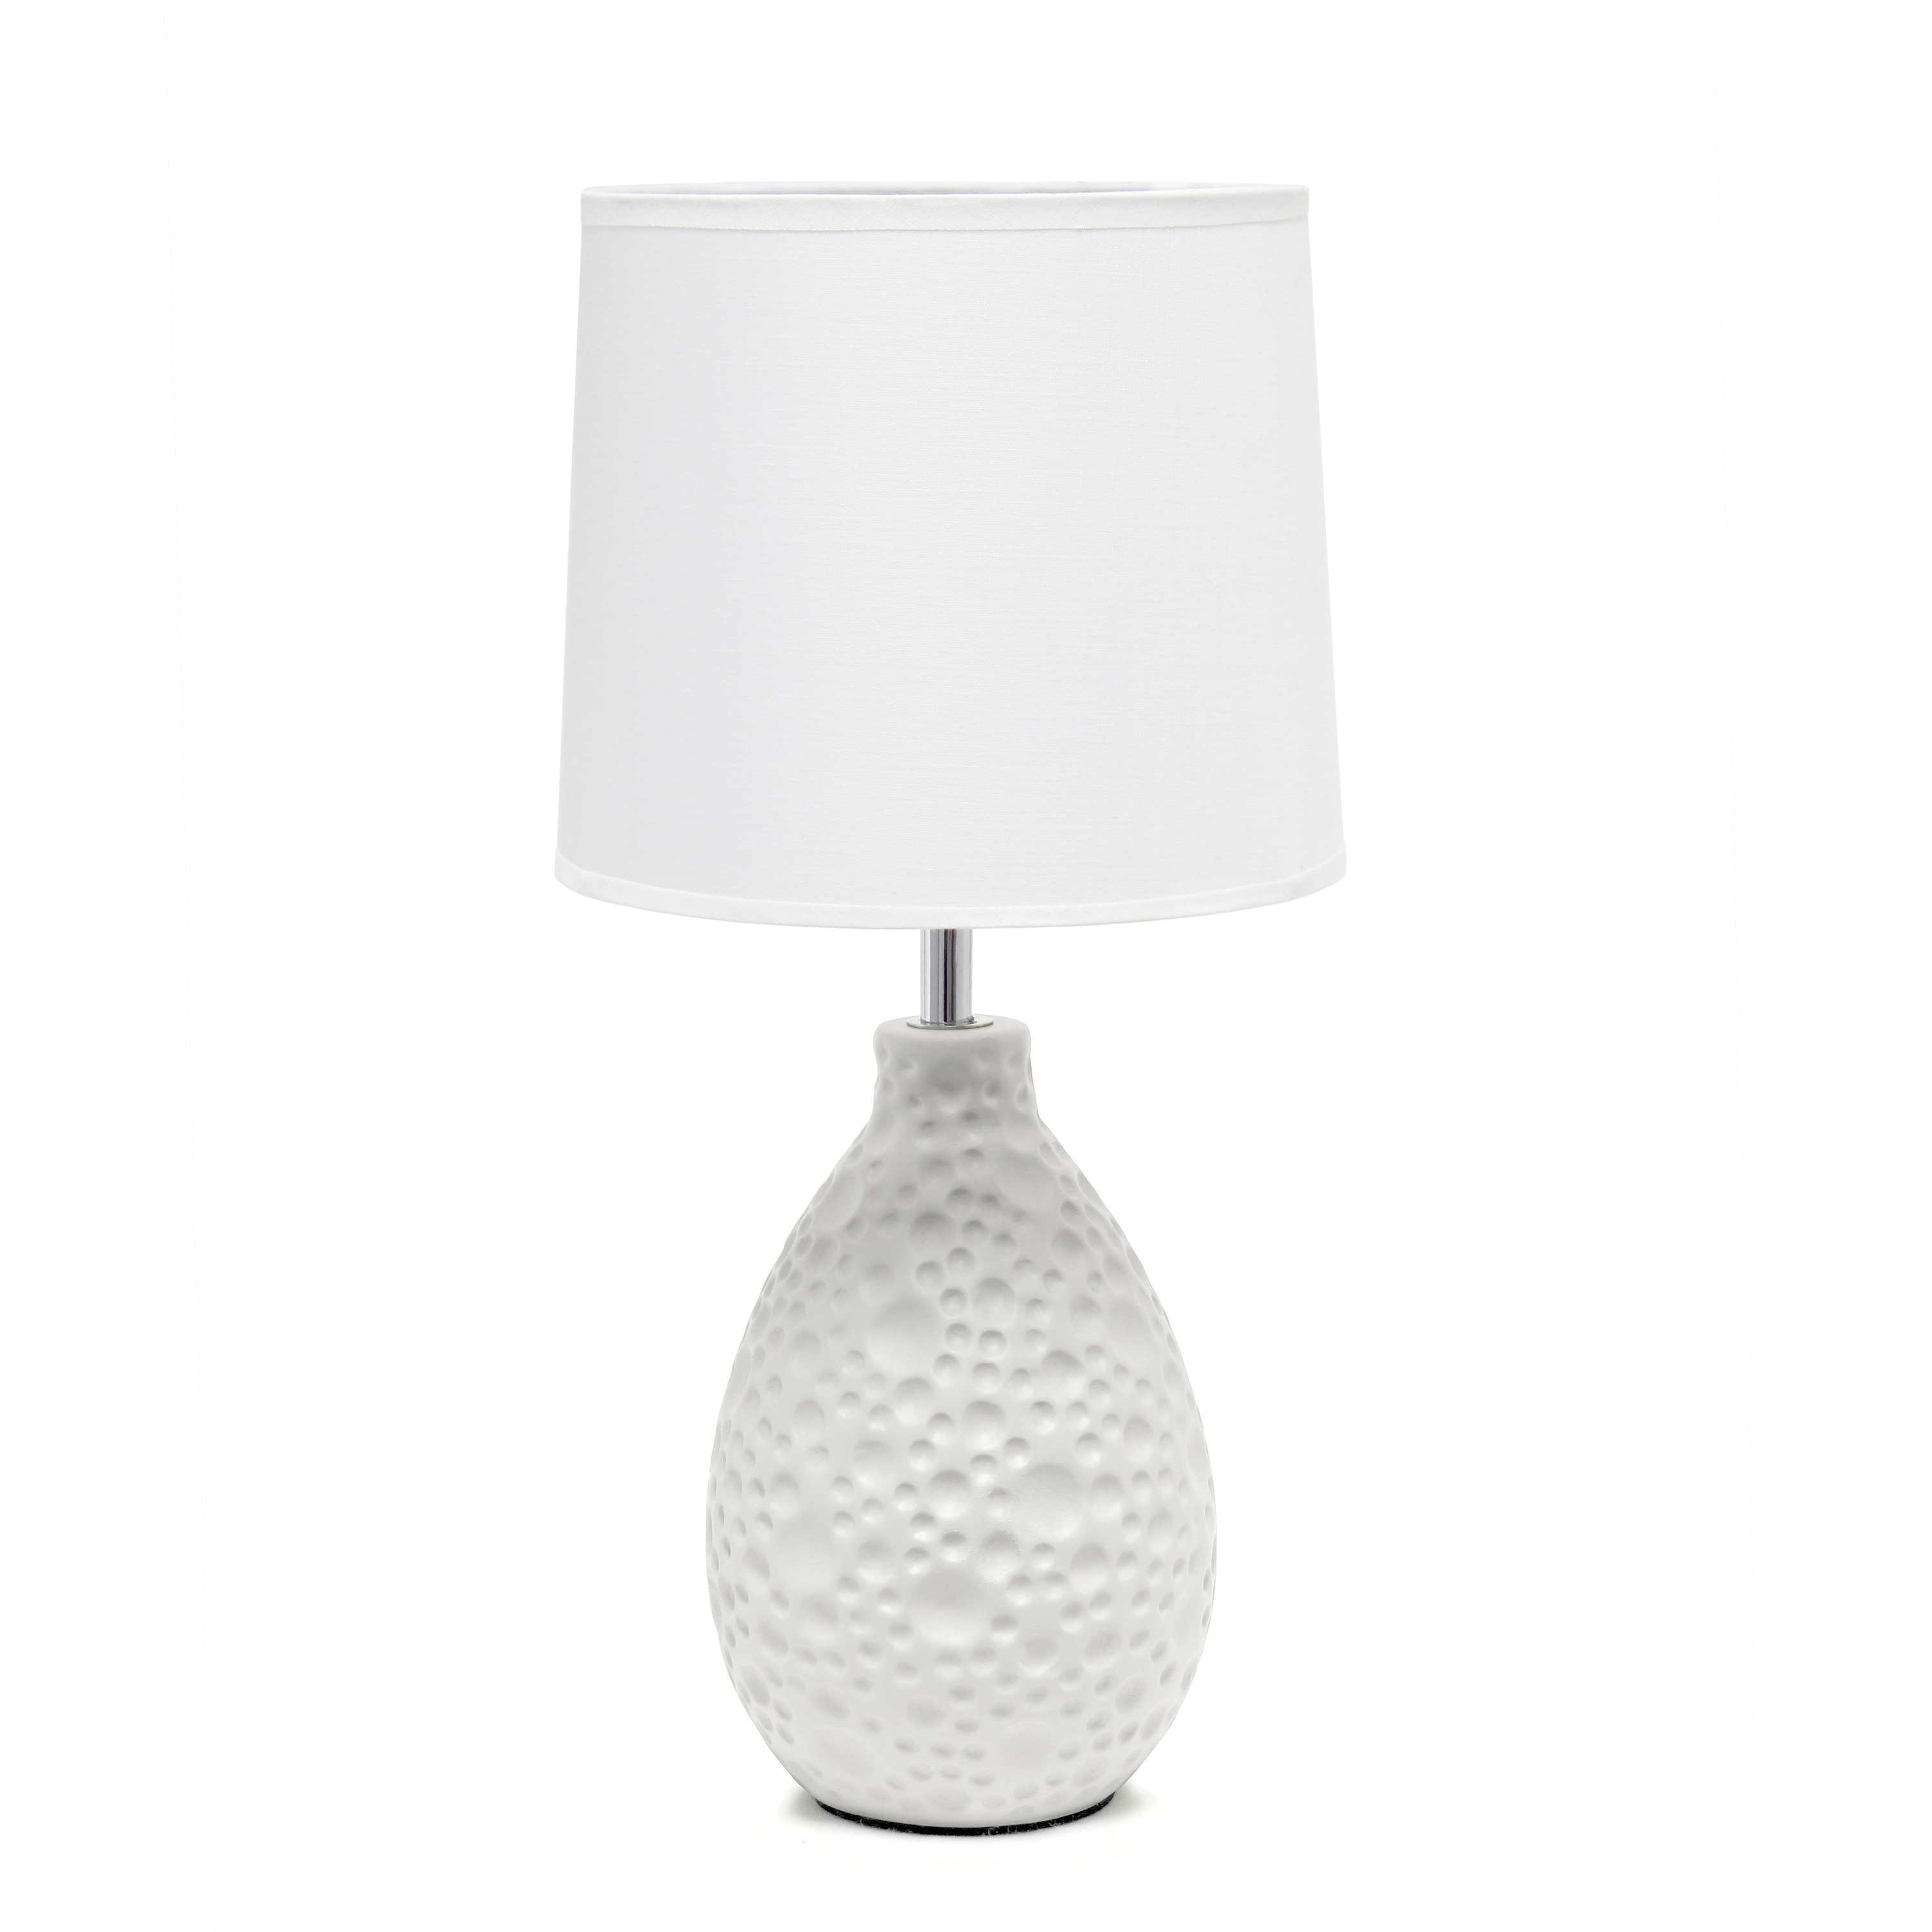 Simple Designs Textured Stucco Ceramic Oval Table Lamp - image 1 of 8